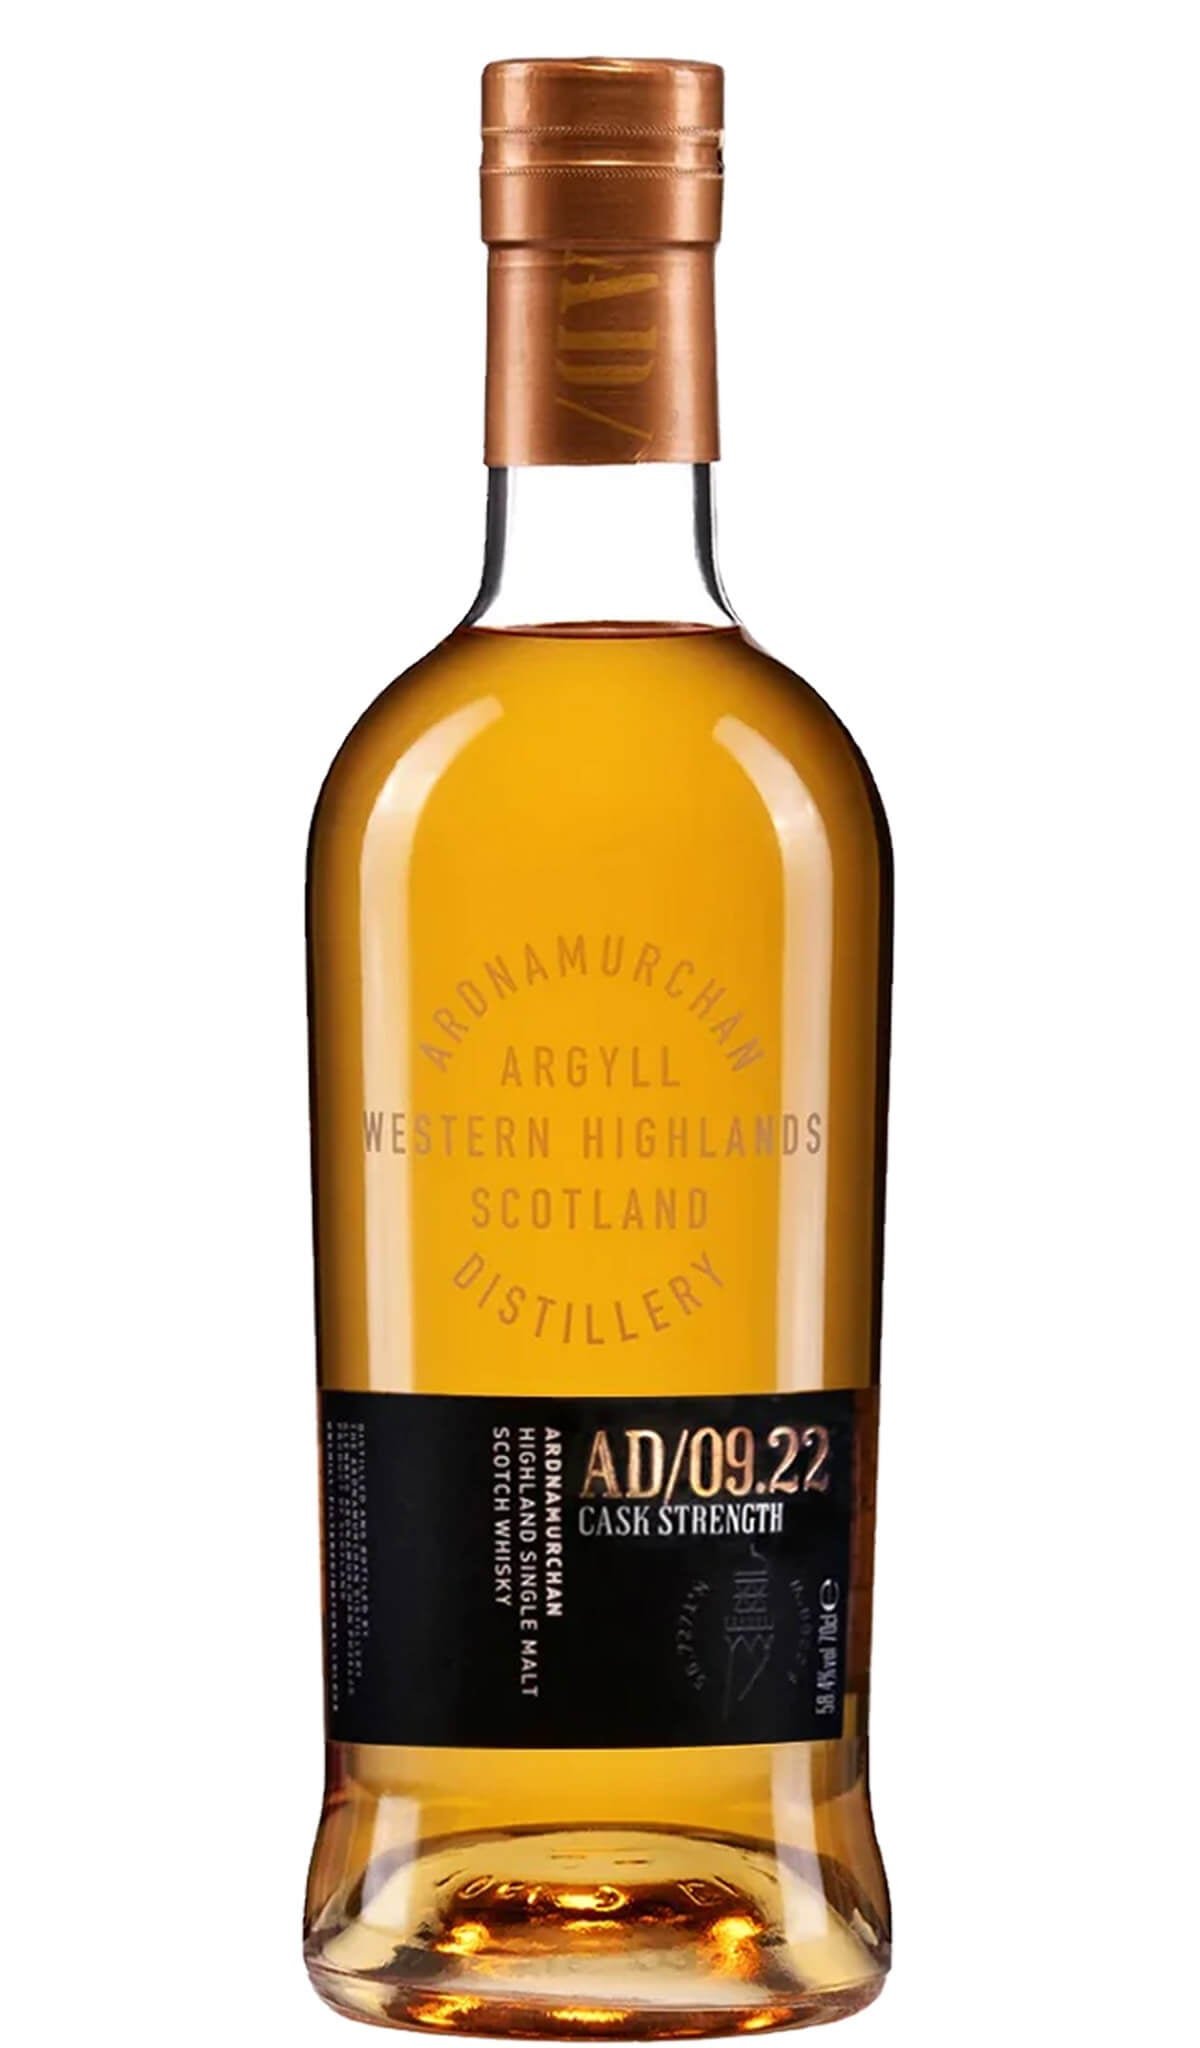 Find out more, explore the range and buy Ardnamurchan AD/09.22 Cask Strength 700mL available online at Wine Sellers Direct - Australia's independent liquor specialists.